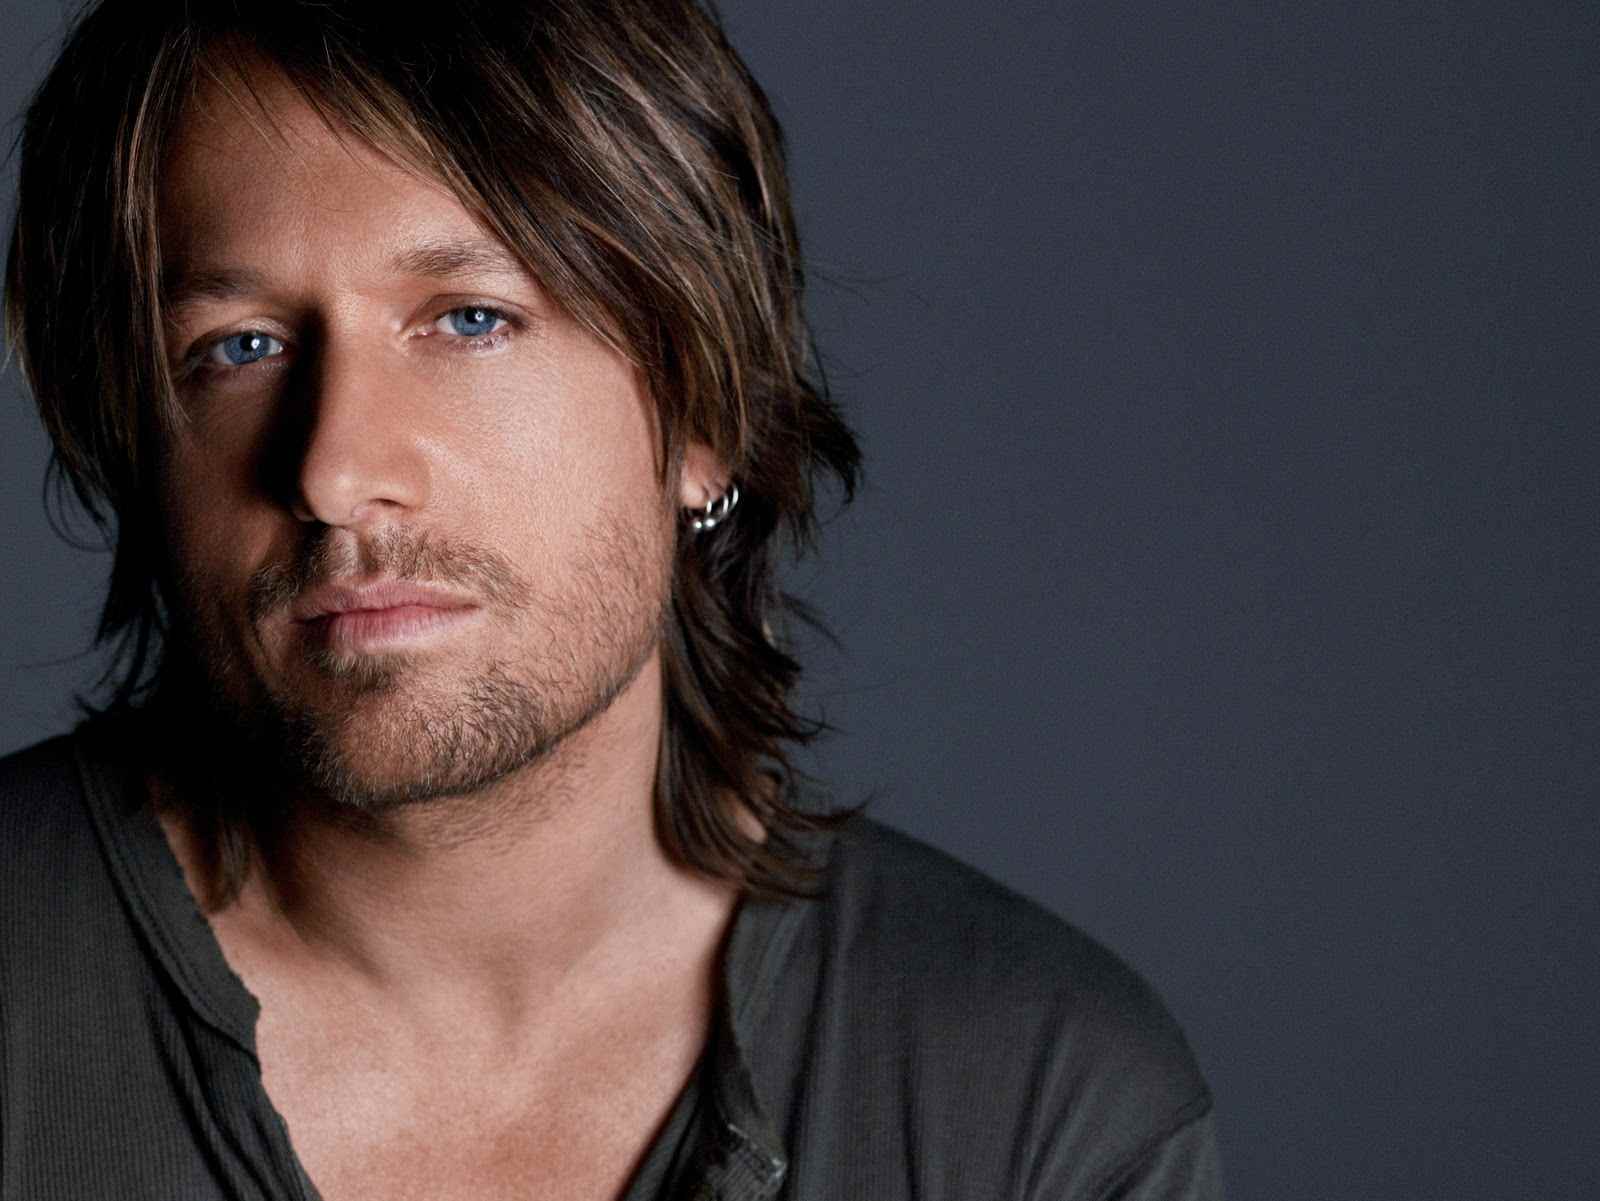 keith urban photo homme cheveux style moderne 